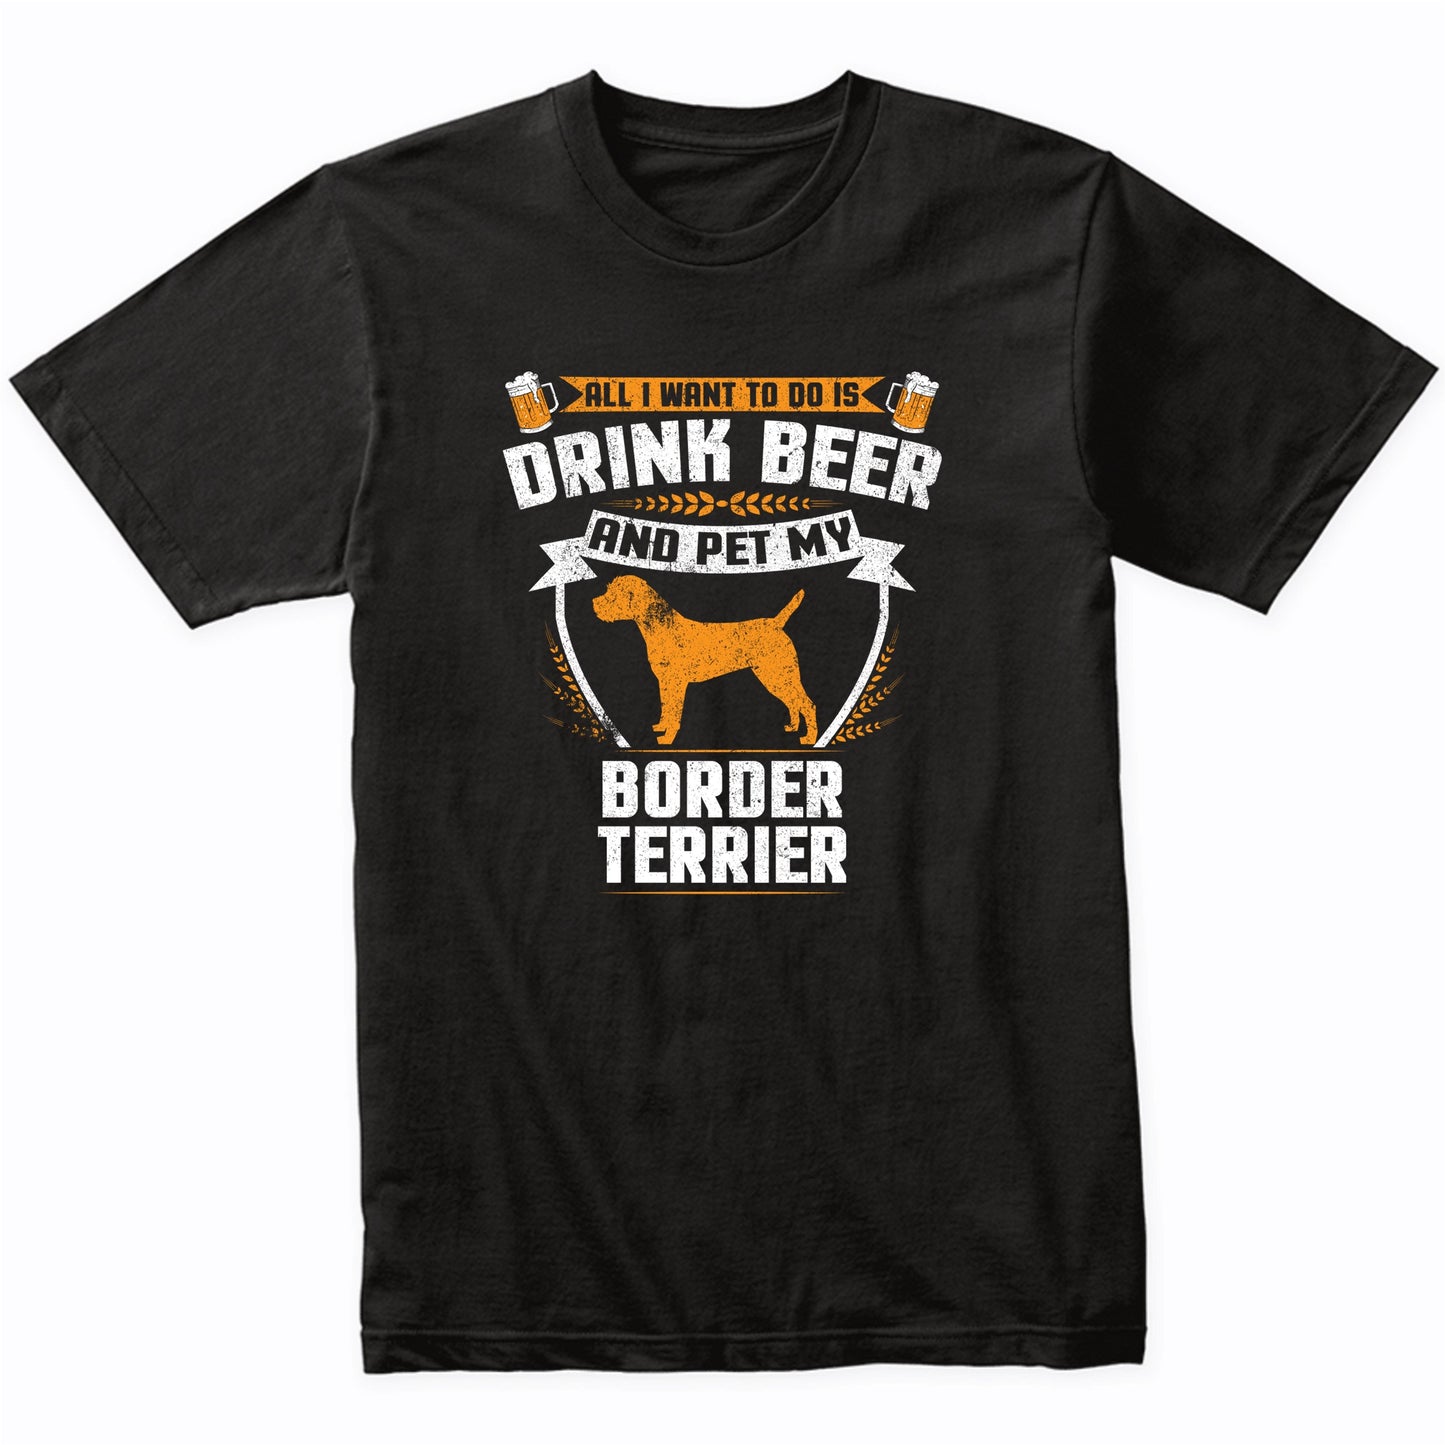 All I Want To Do Is Drink Beer And Pet My Border Terrier Funny Dog Owner Shirt